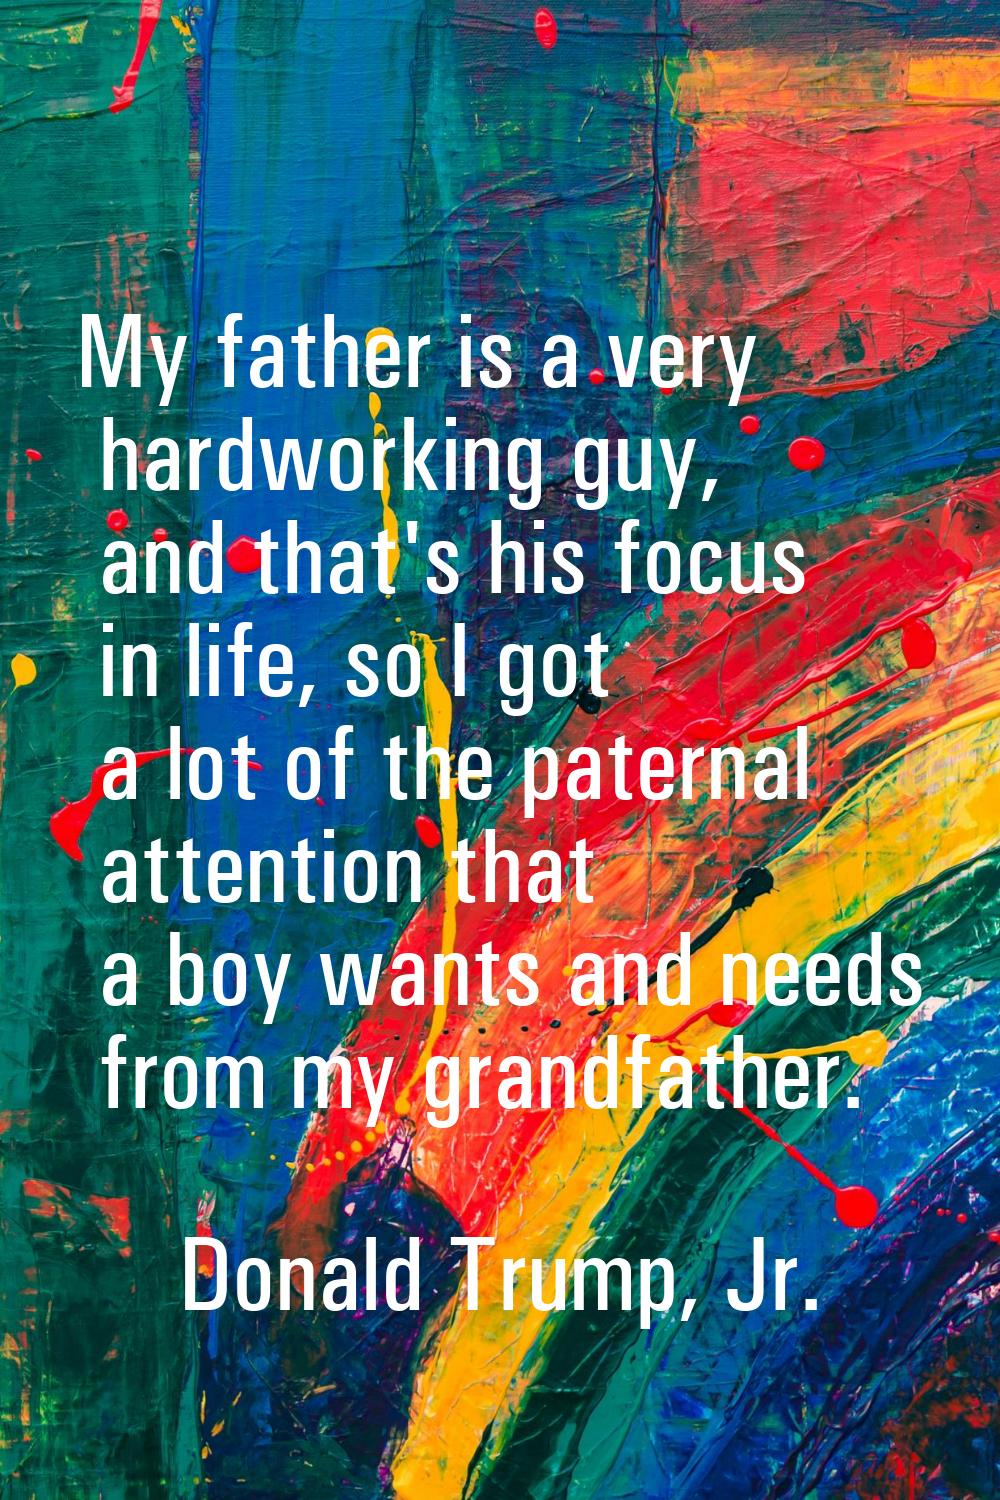 My father is a very hardworking guy, and that's his focus in life, so I got a lot of the paternal a